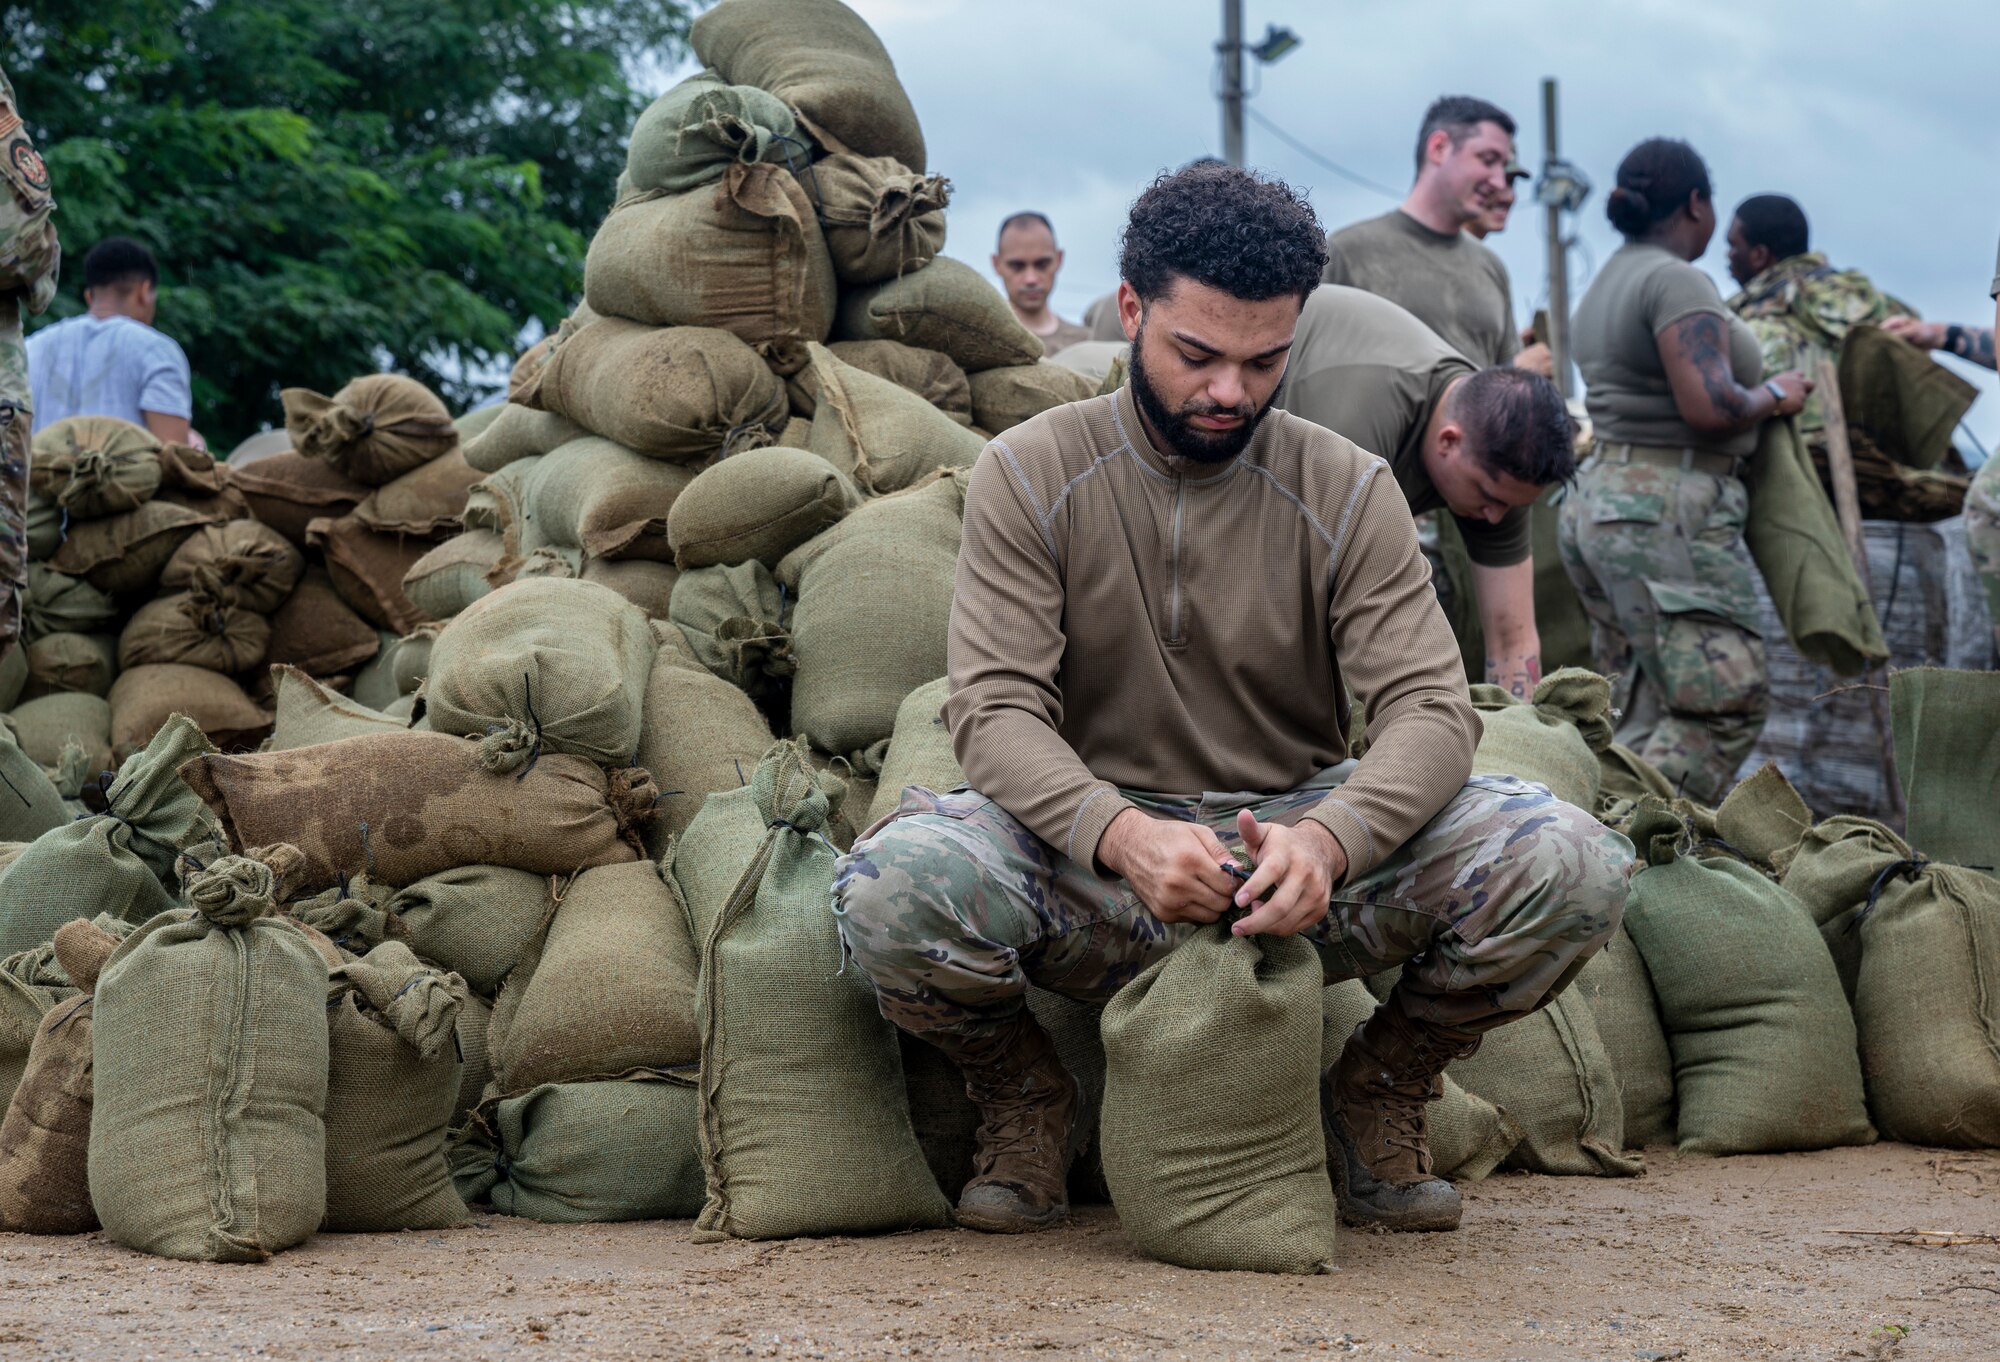 Senior Airman Bryant Lewis, 51st Operation Support Squadron air traffic controller, ties a sand bag at Osan Air Base, Republic of Korea, Aug. 9, 2022.